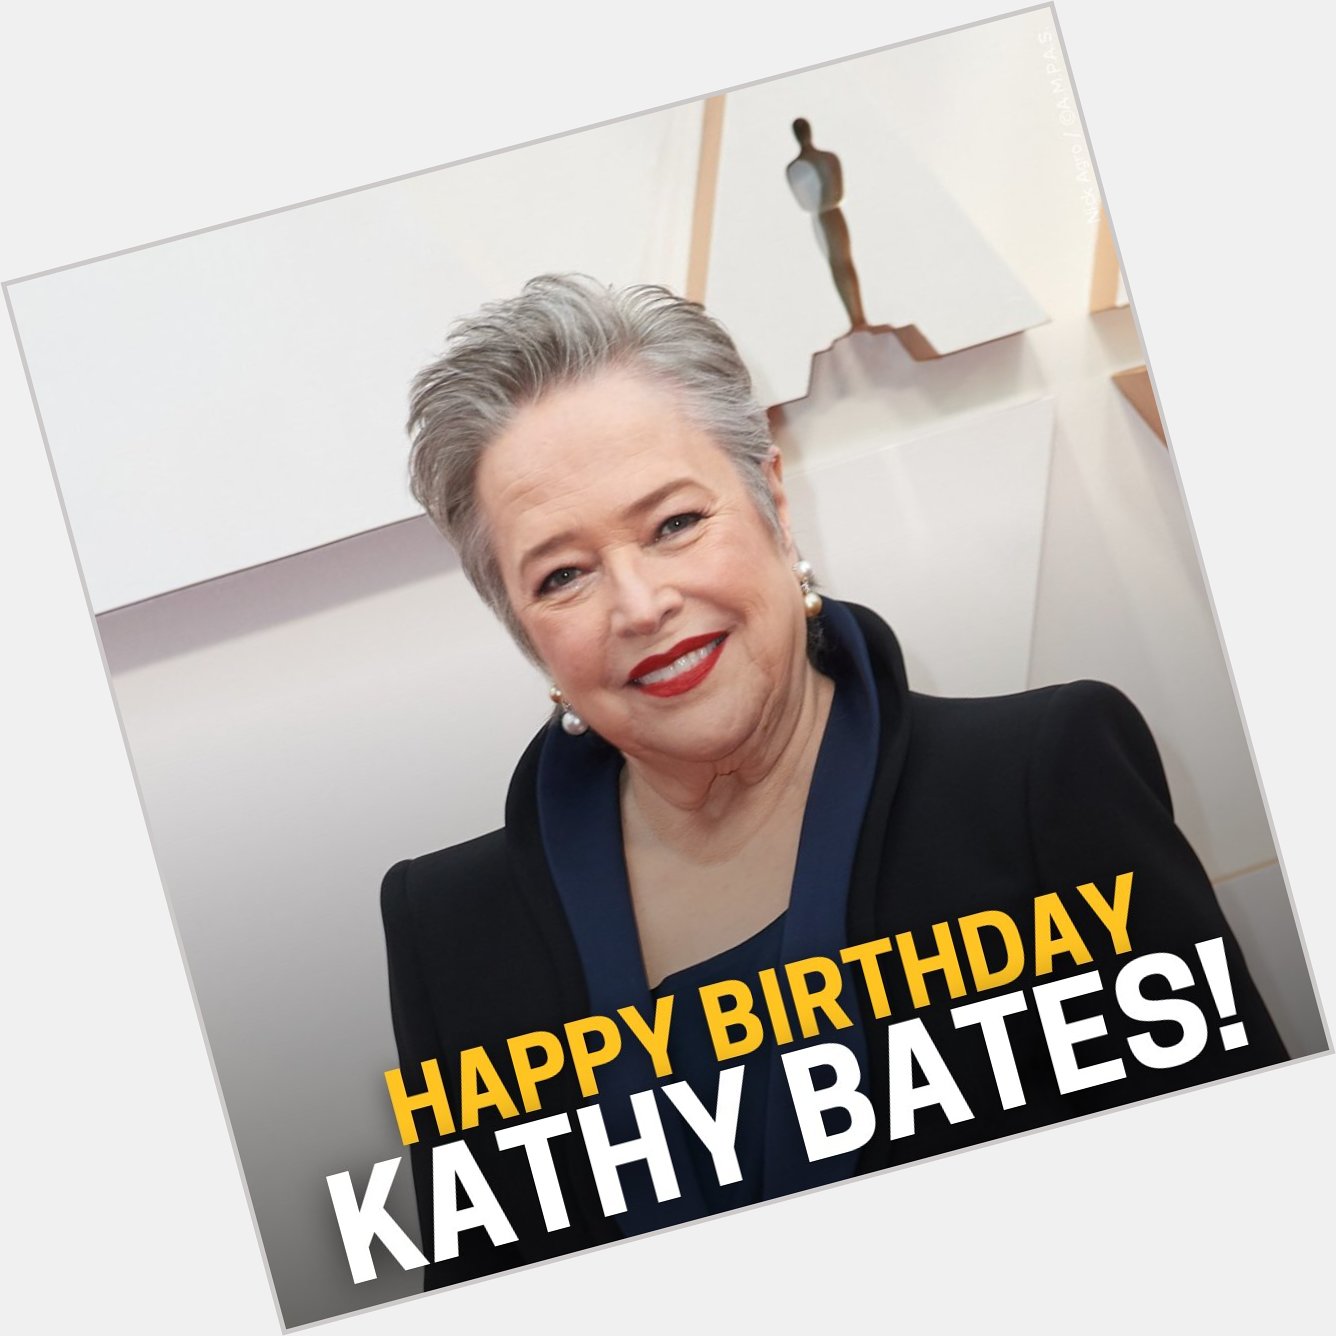 Happy birthday! What is your favorite Kathy Bates movie/role? 